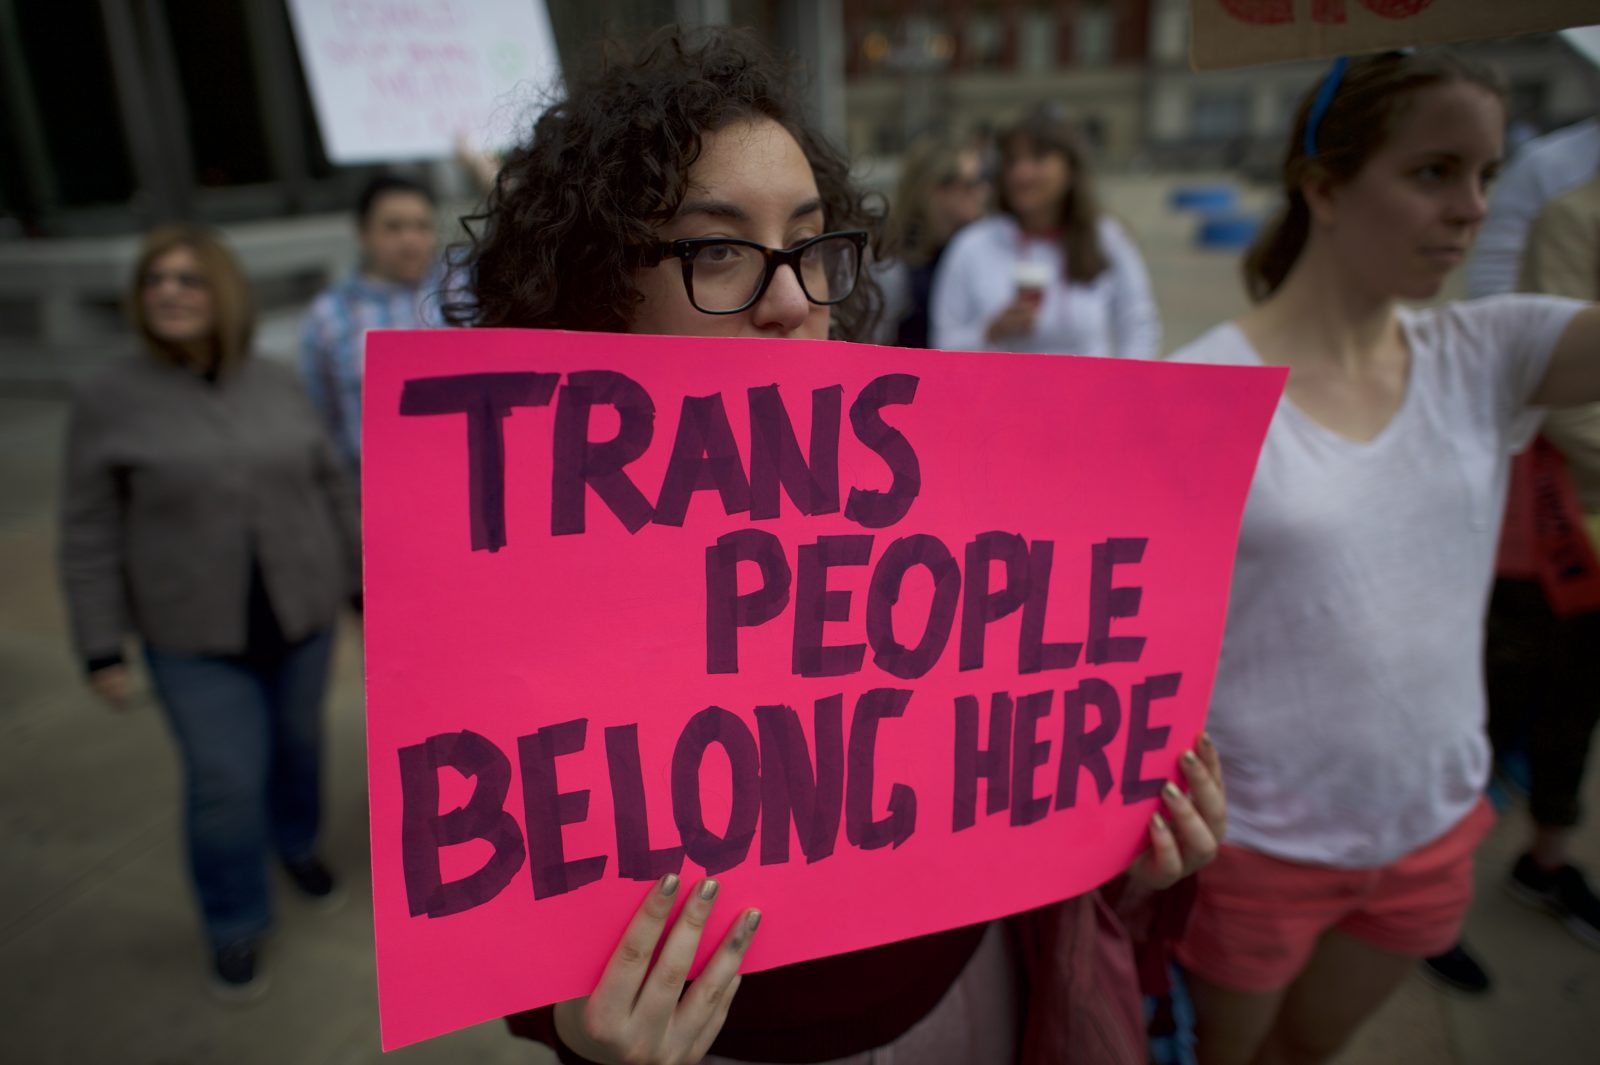 Transvestite, Transsexual, Transgender: Here's what you should actually  call trans people